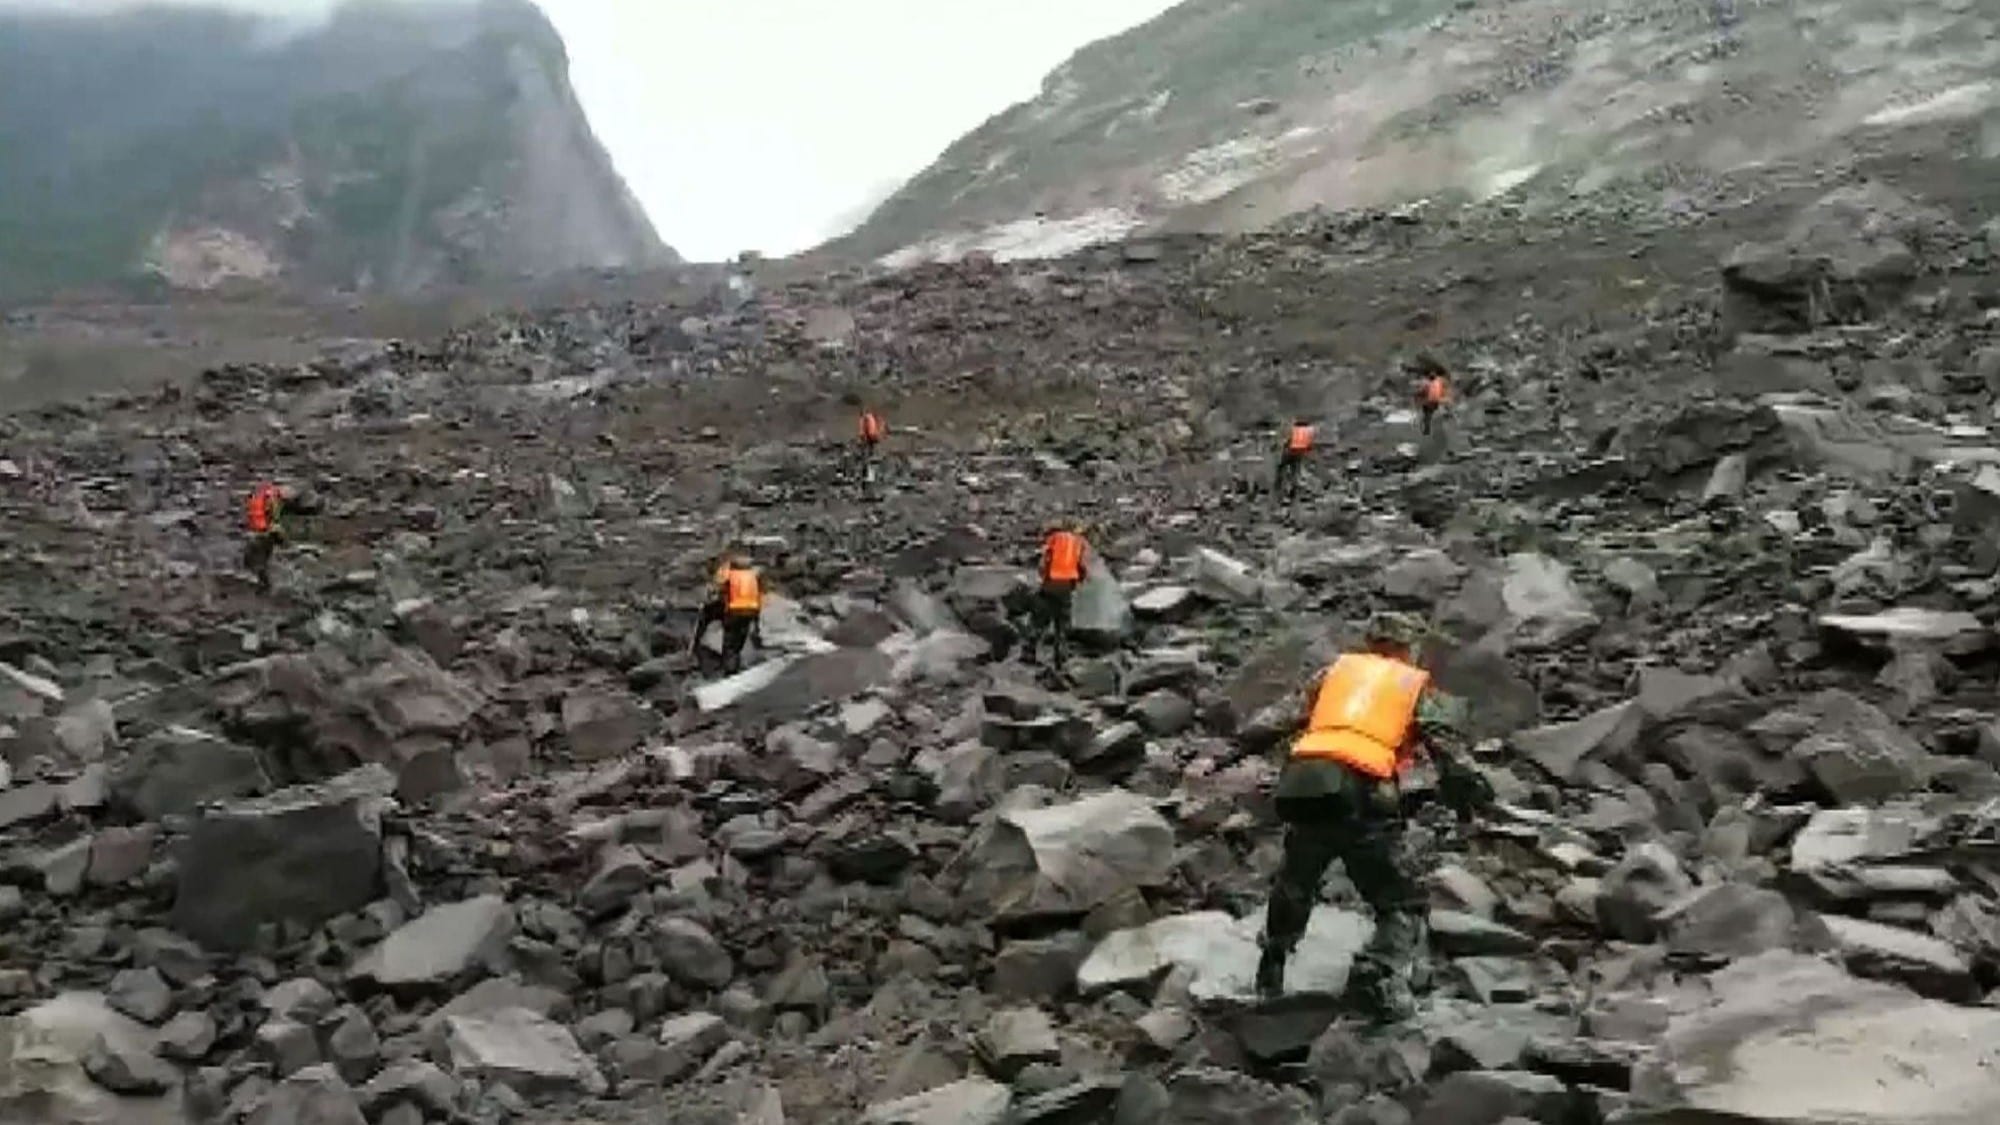 RESCUERS ARE SEARCHING IN CHINA FOR SURVIVORS OF A LANDSLIDE